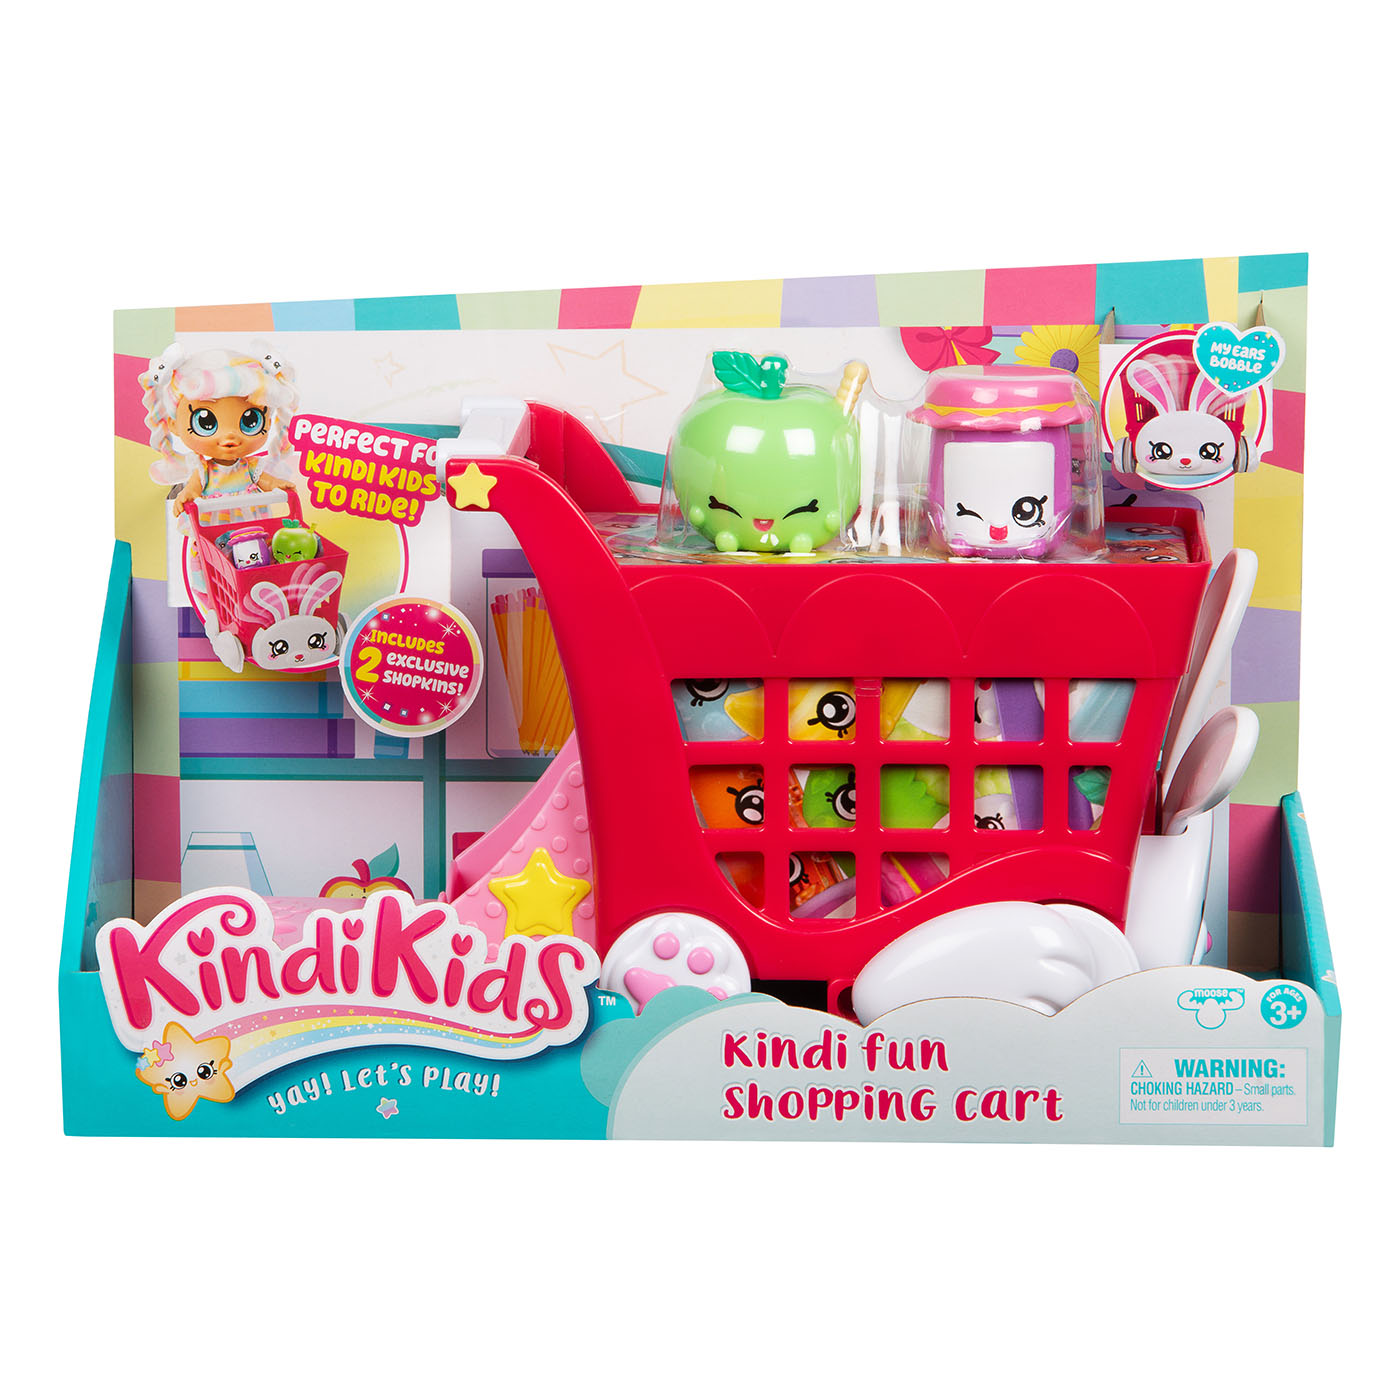 Kindi Kids Fun Shopping Cart With 2 Shopkins 090 for sale online 